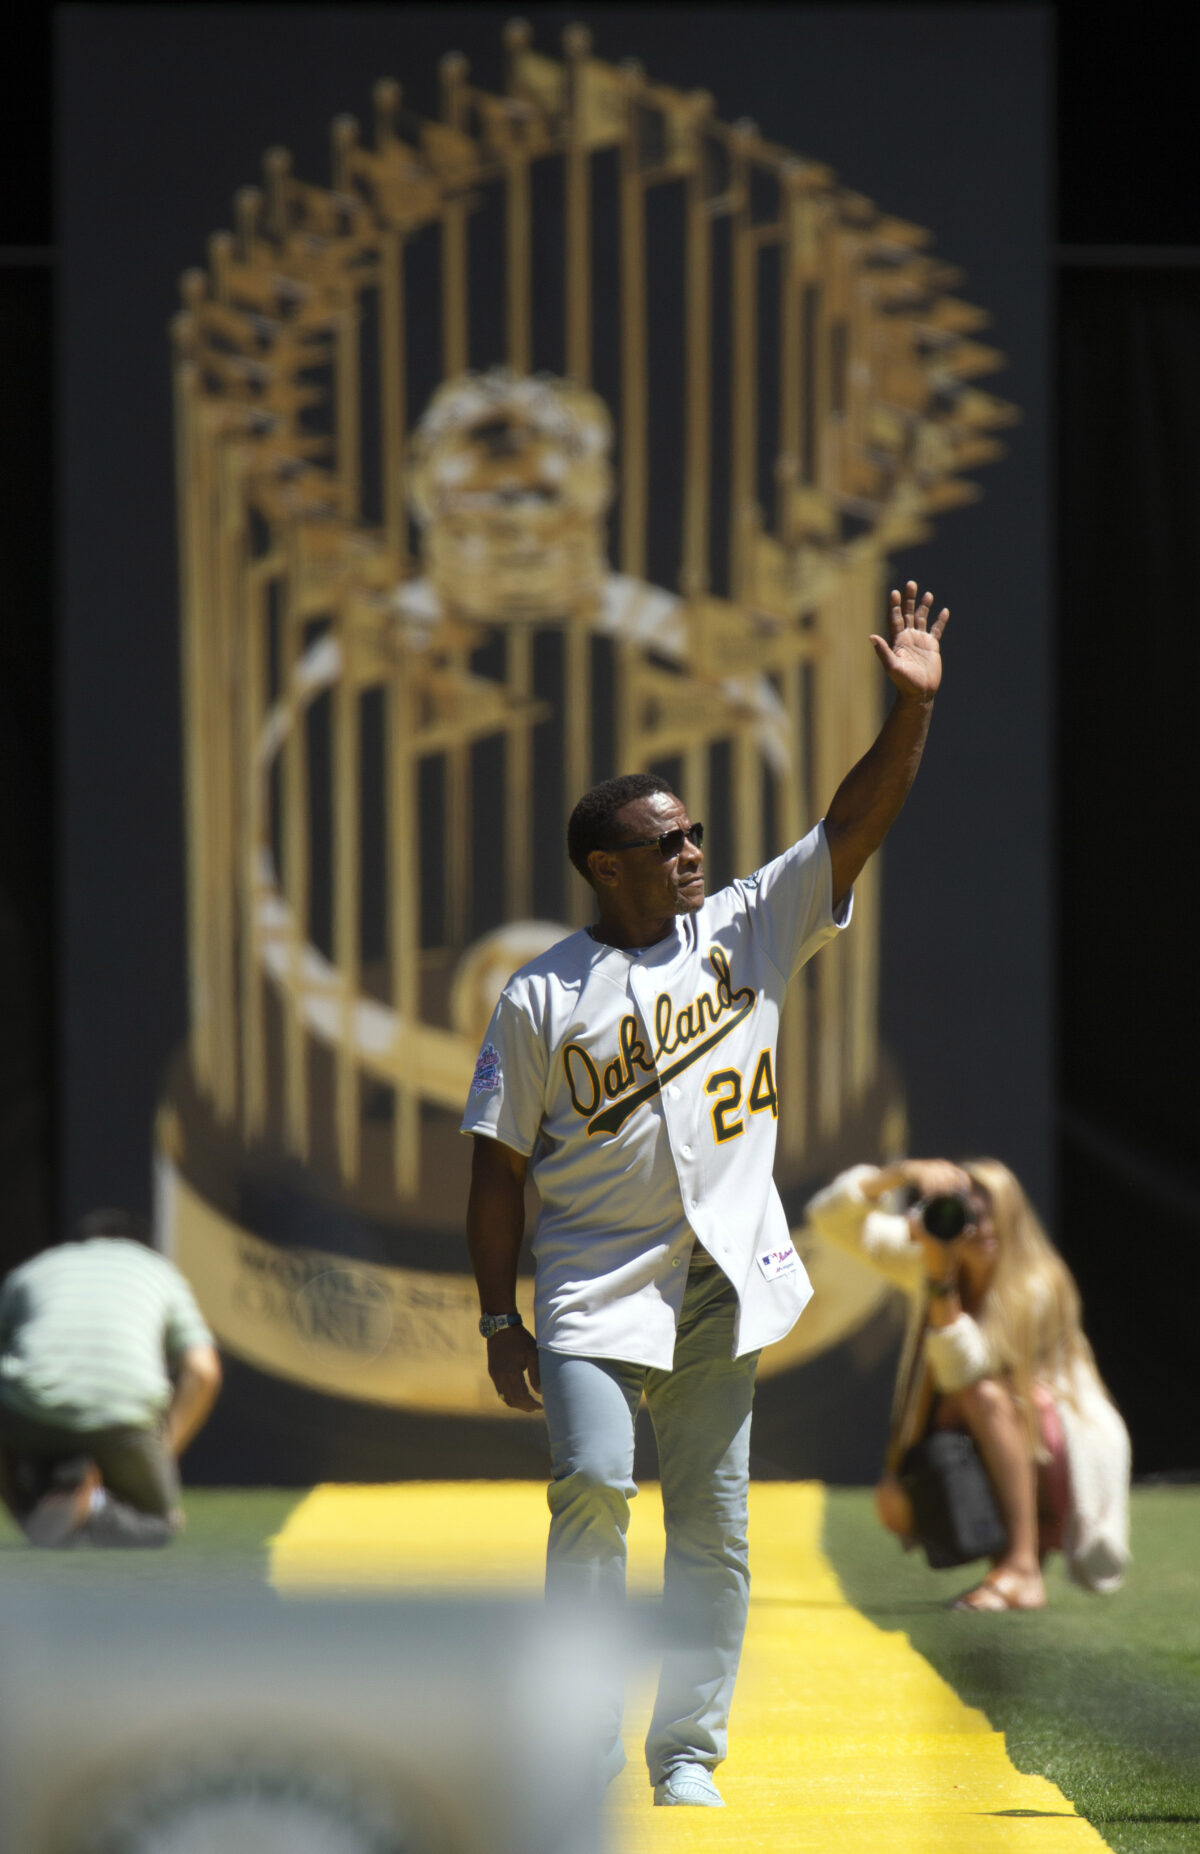 The glory days of the Oakland Athletics